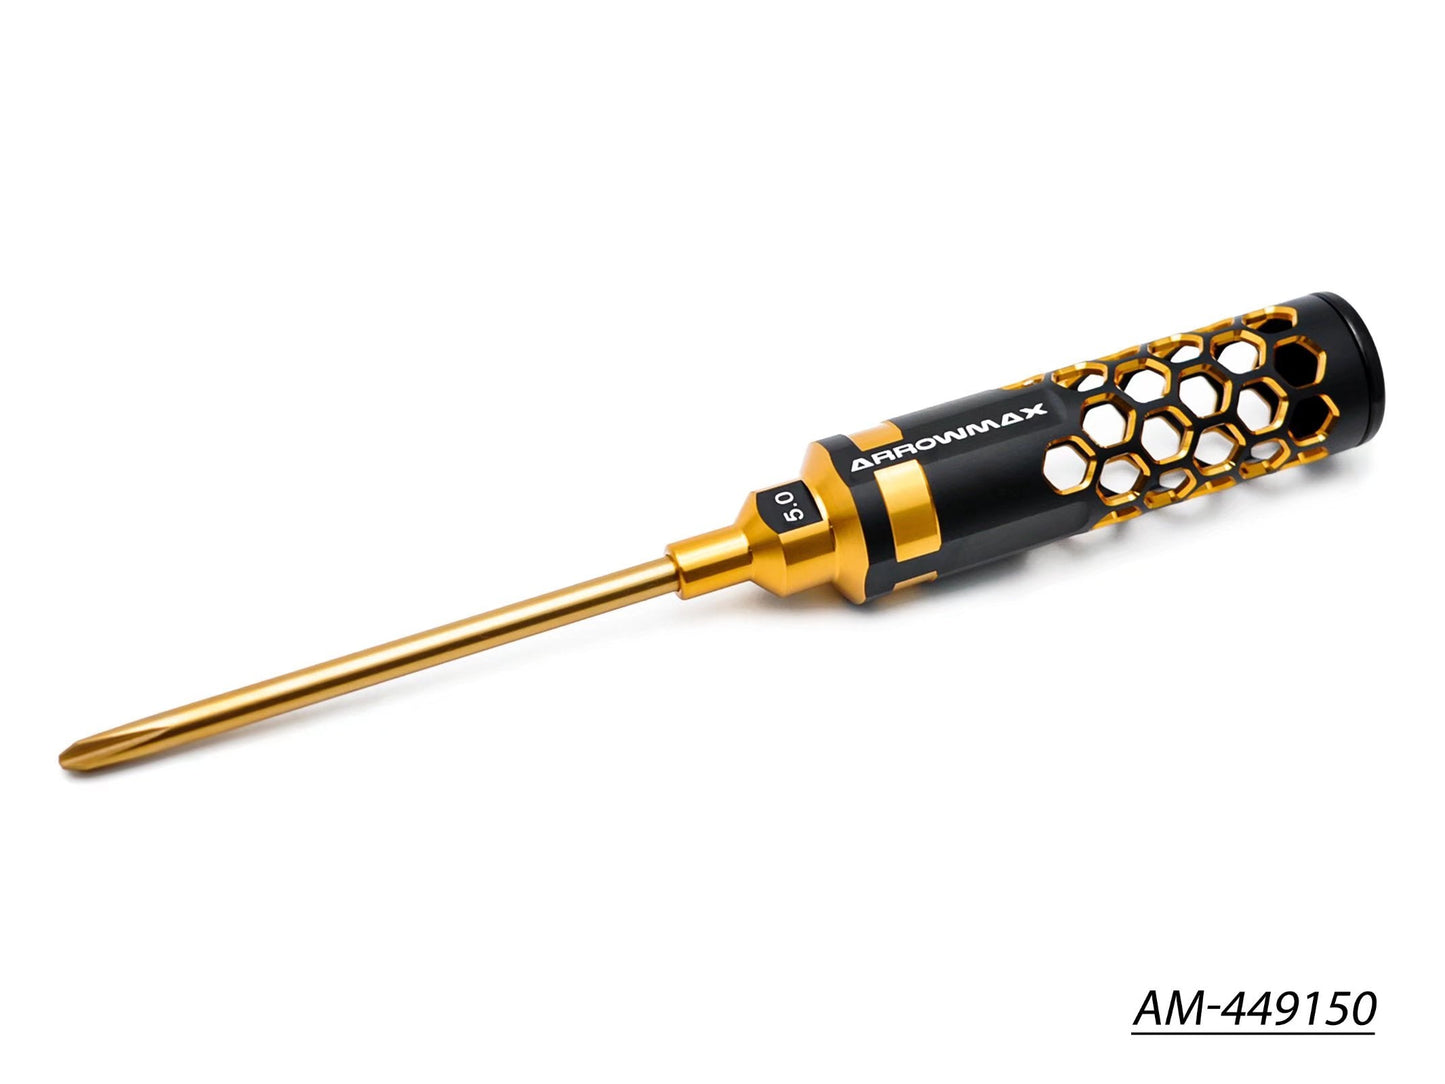 Phillips Screwdriver 5.0 X 110mm Limited Edition AM-449150